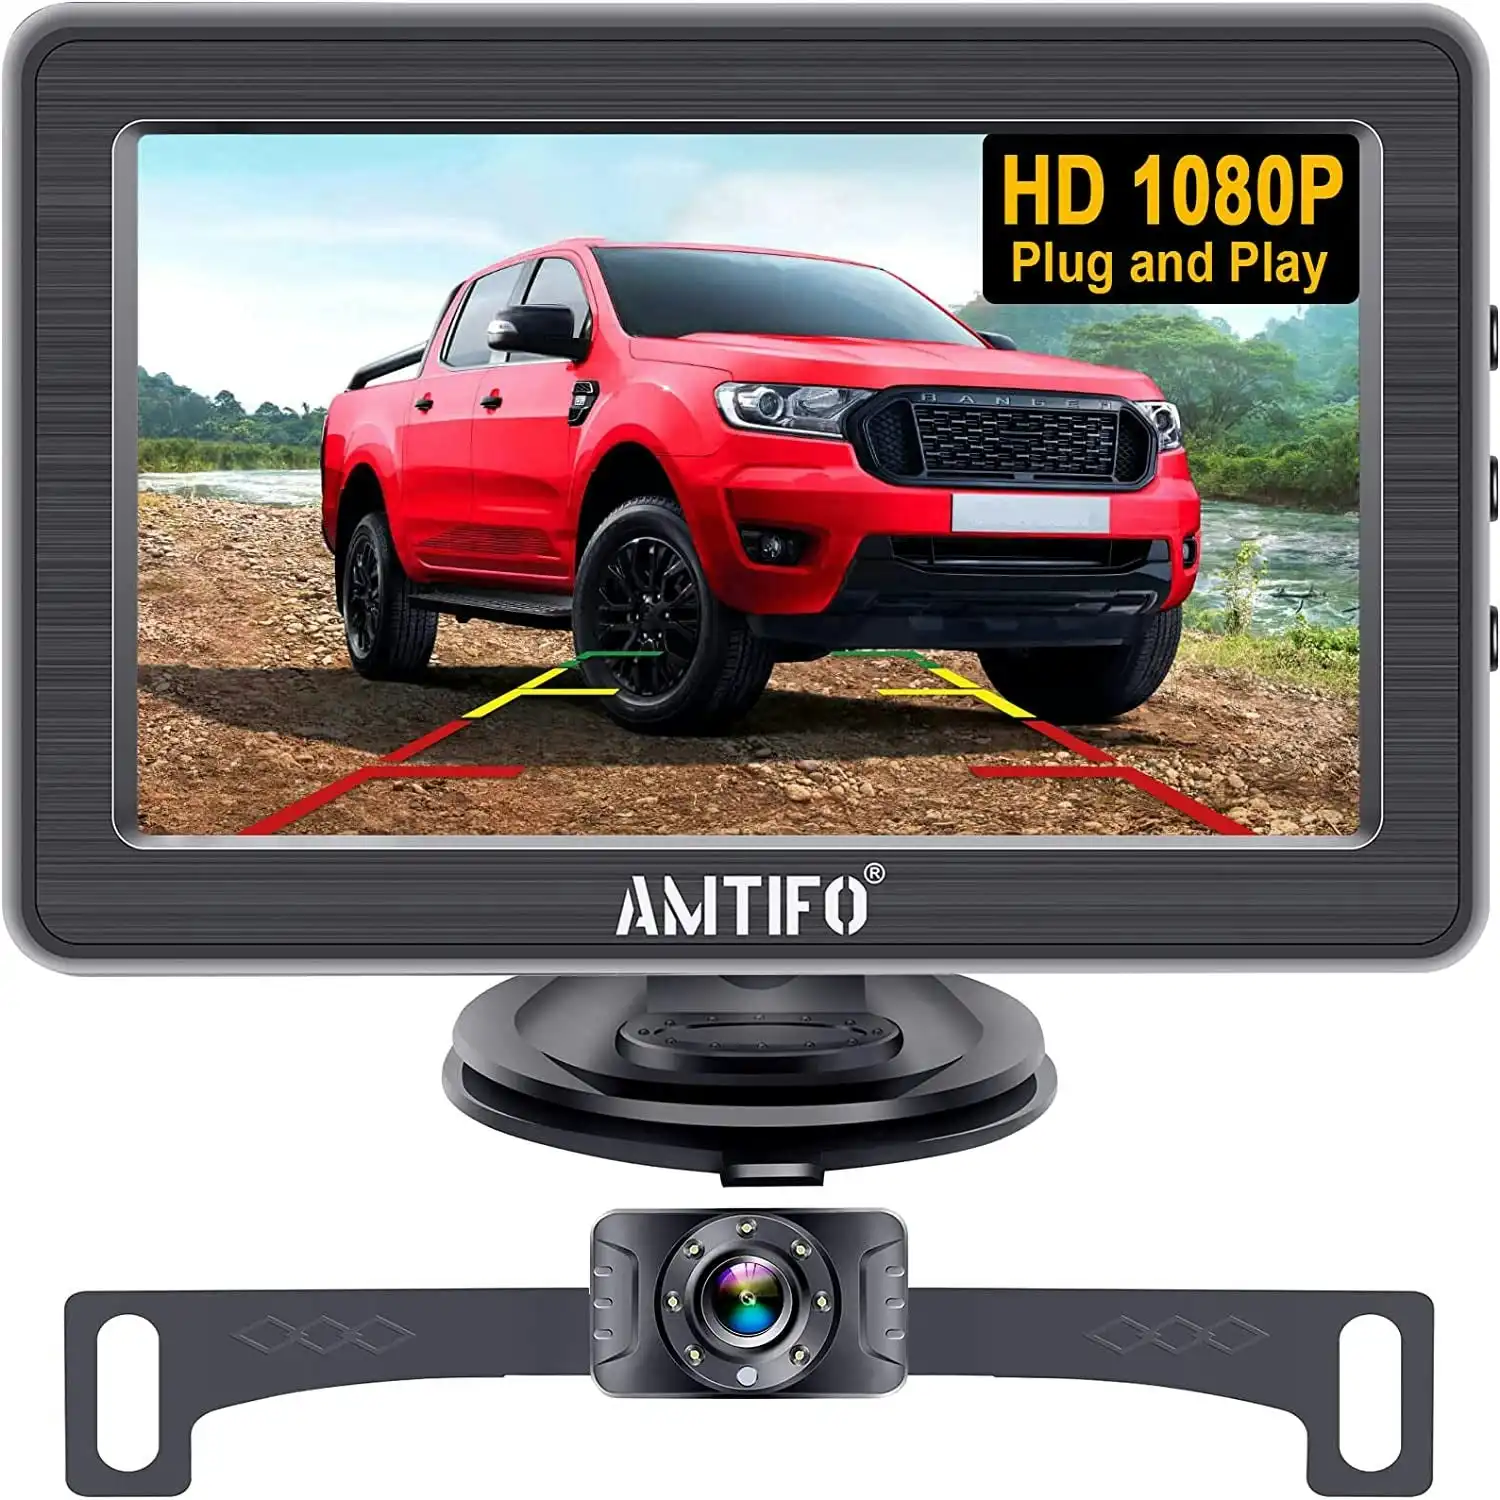 AMTIFO Backup Camera HD 1080P Rear View Monitor for Car Truck Camper Minivan Reverse Cam System License Plate Waterproof Clear Night Vision DIY Guidelines A2